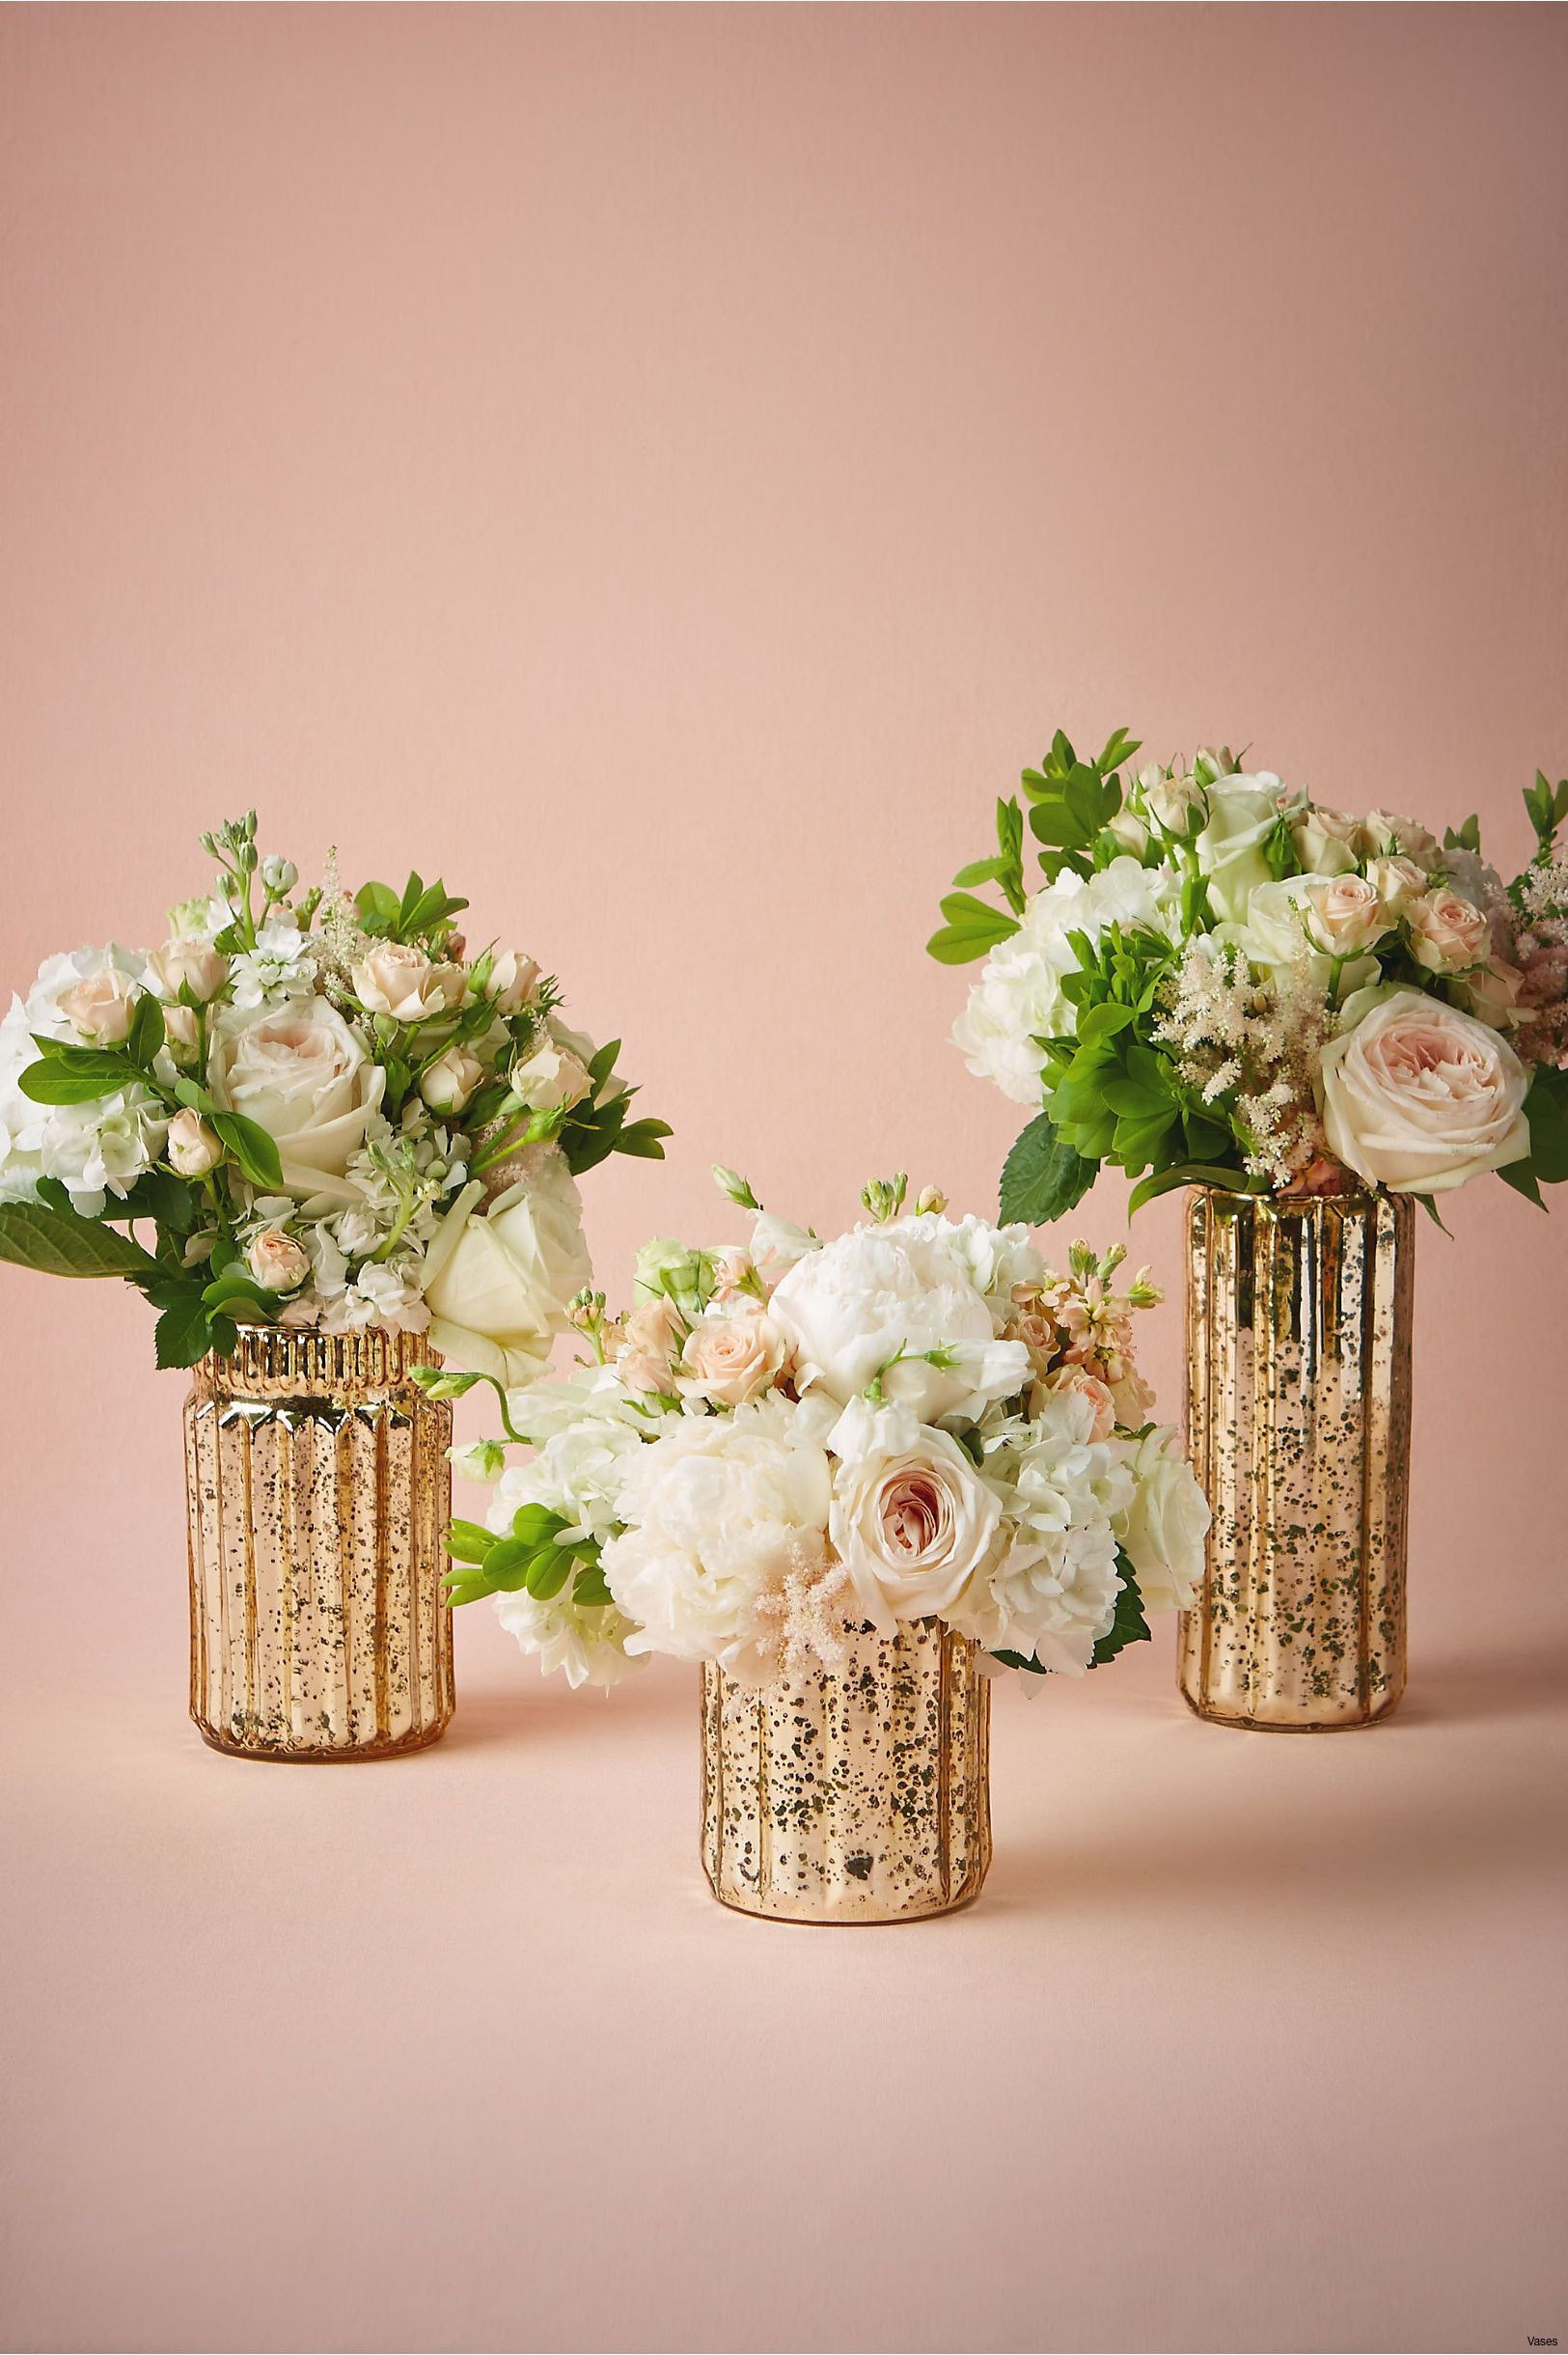 13 Stylish 9 Inch Cylinder Vases Dollar Tree 2024 free download 9 inch cylinder vases dollar tree of 23 tall cylinder vases the weekly world throughout flowers decorations for weddings popular 6625 1h vases mercury glass